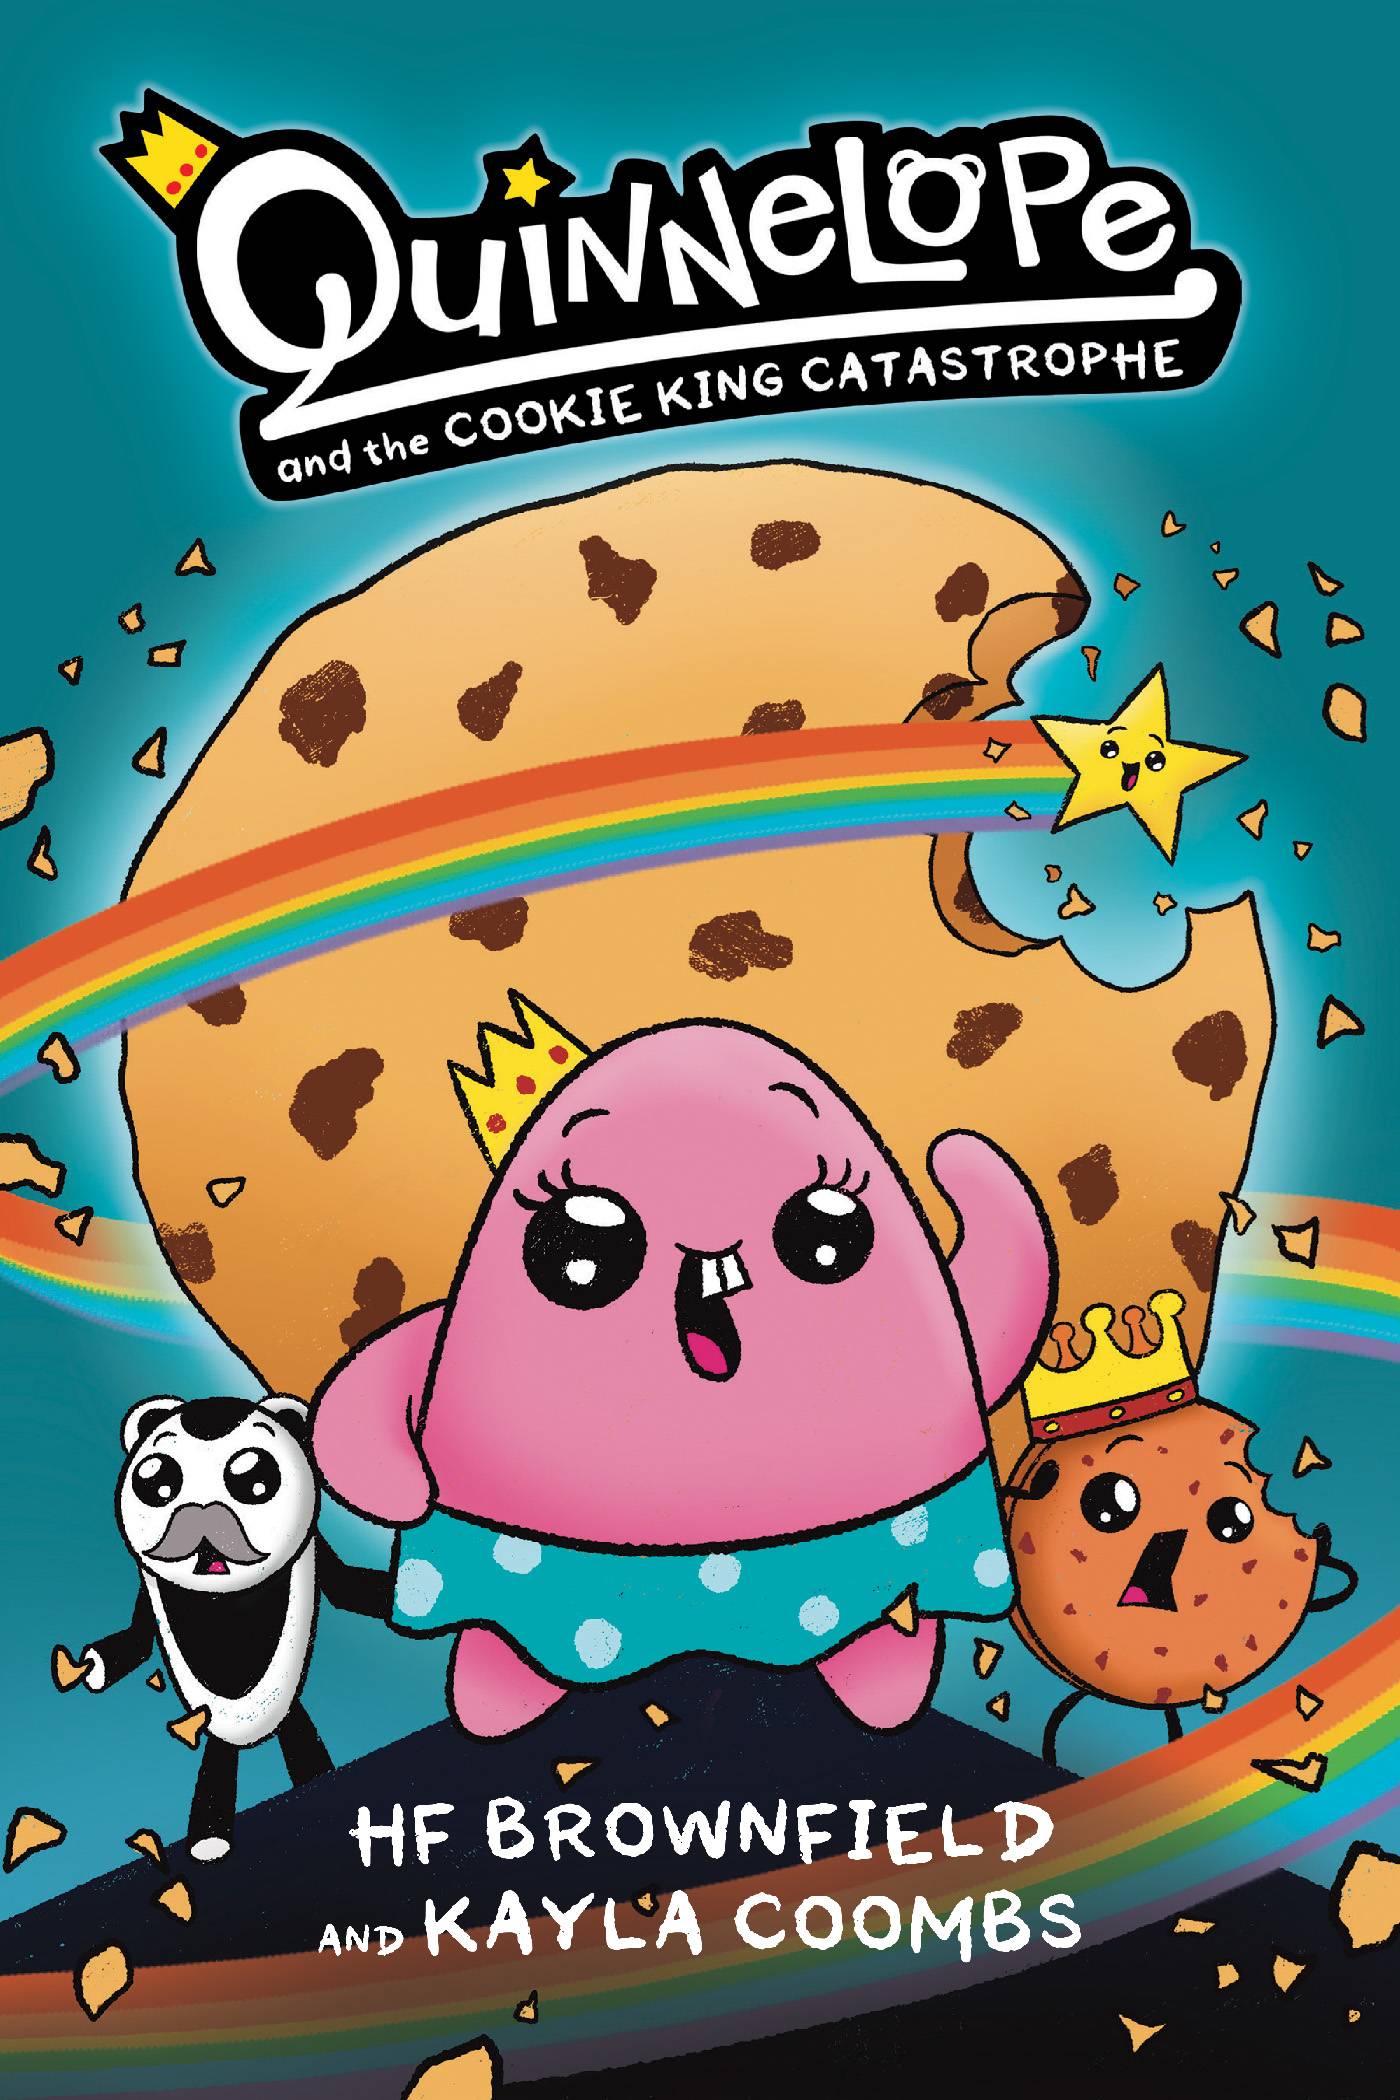 QUINNELOPE AND THE COOKIE KING CATASTROPHE GN